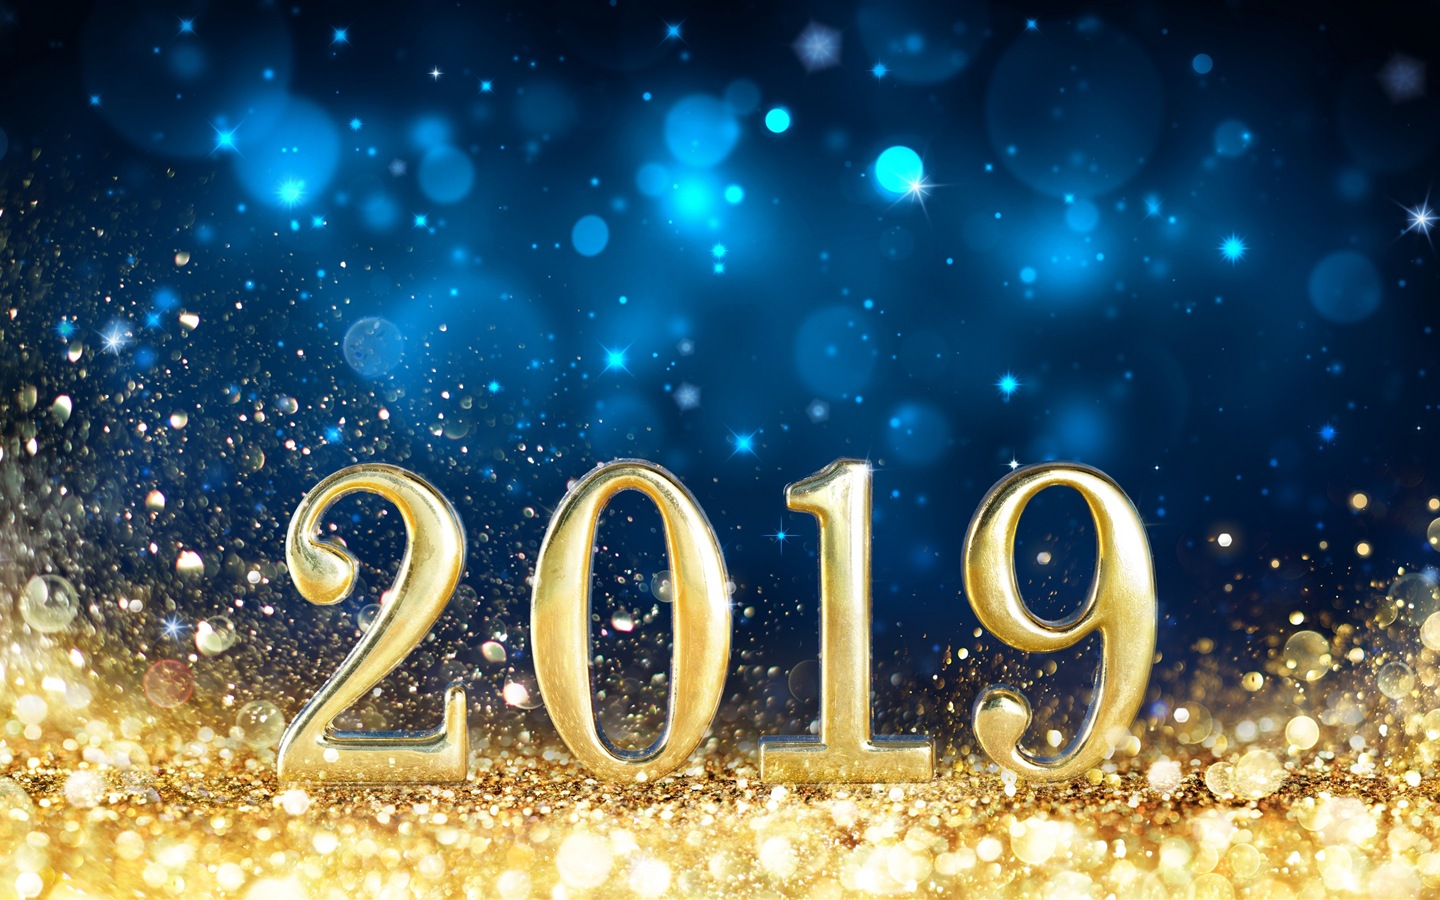 Happy New Year 2019 HD wallpapers #5 - 1440x900